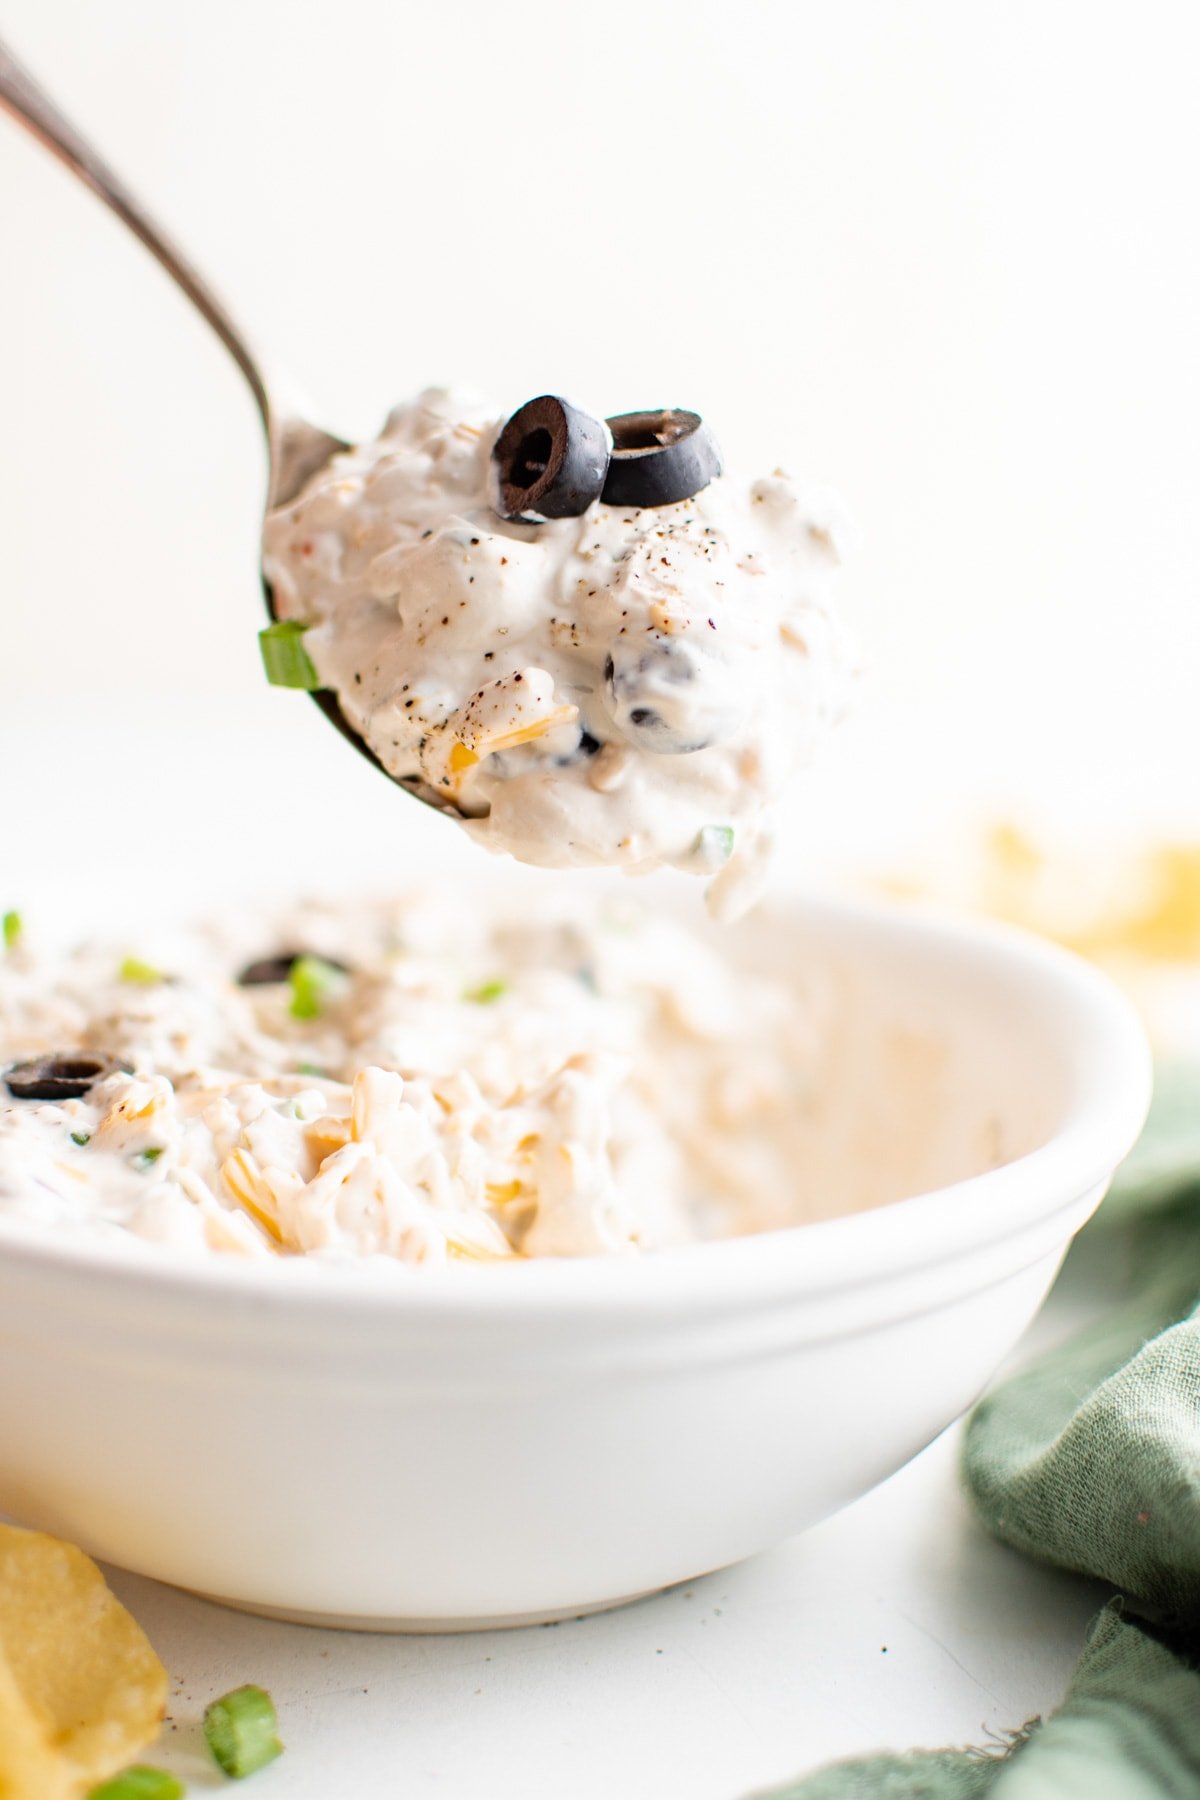 Olive dip in a bowl and on a spoon.